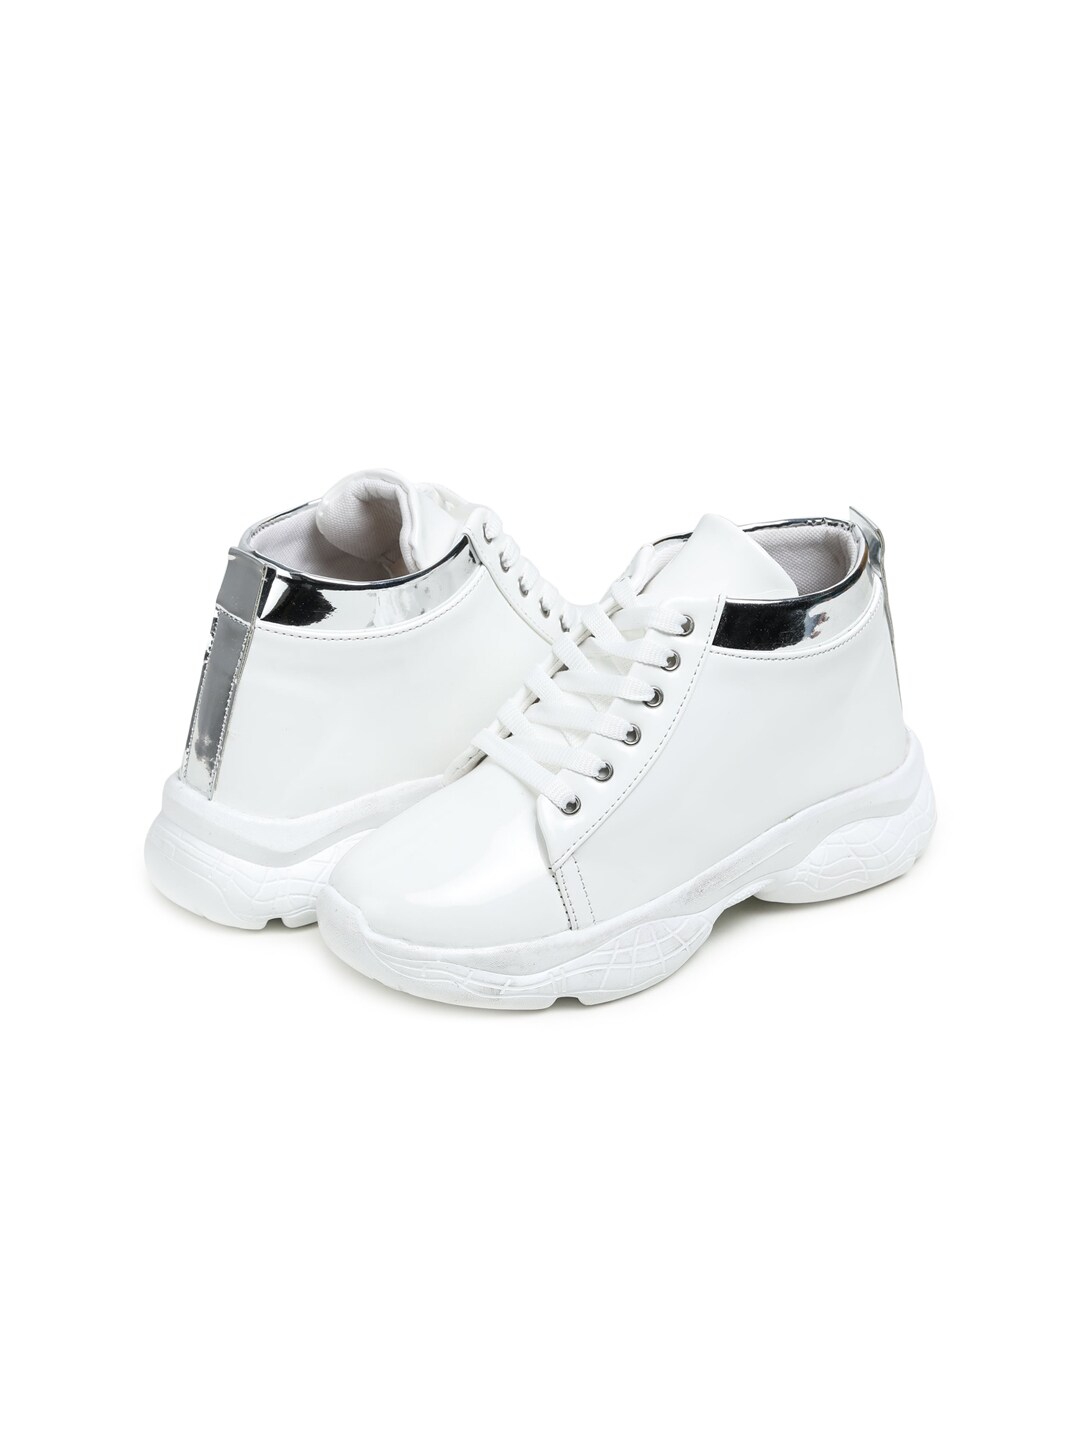 BOOTCO Women White  Casual Stylish High Ankle Sneakers for Girls With Silver Stripes Price in India